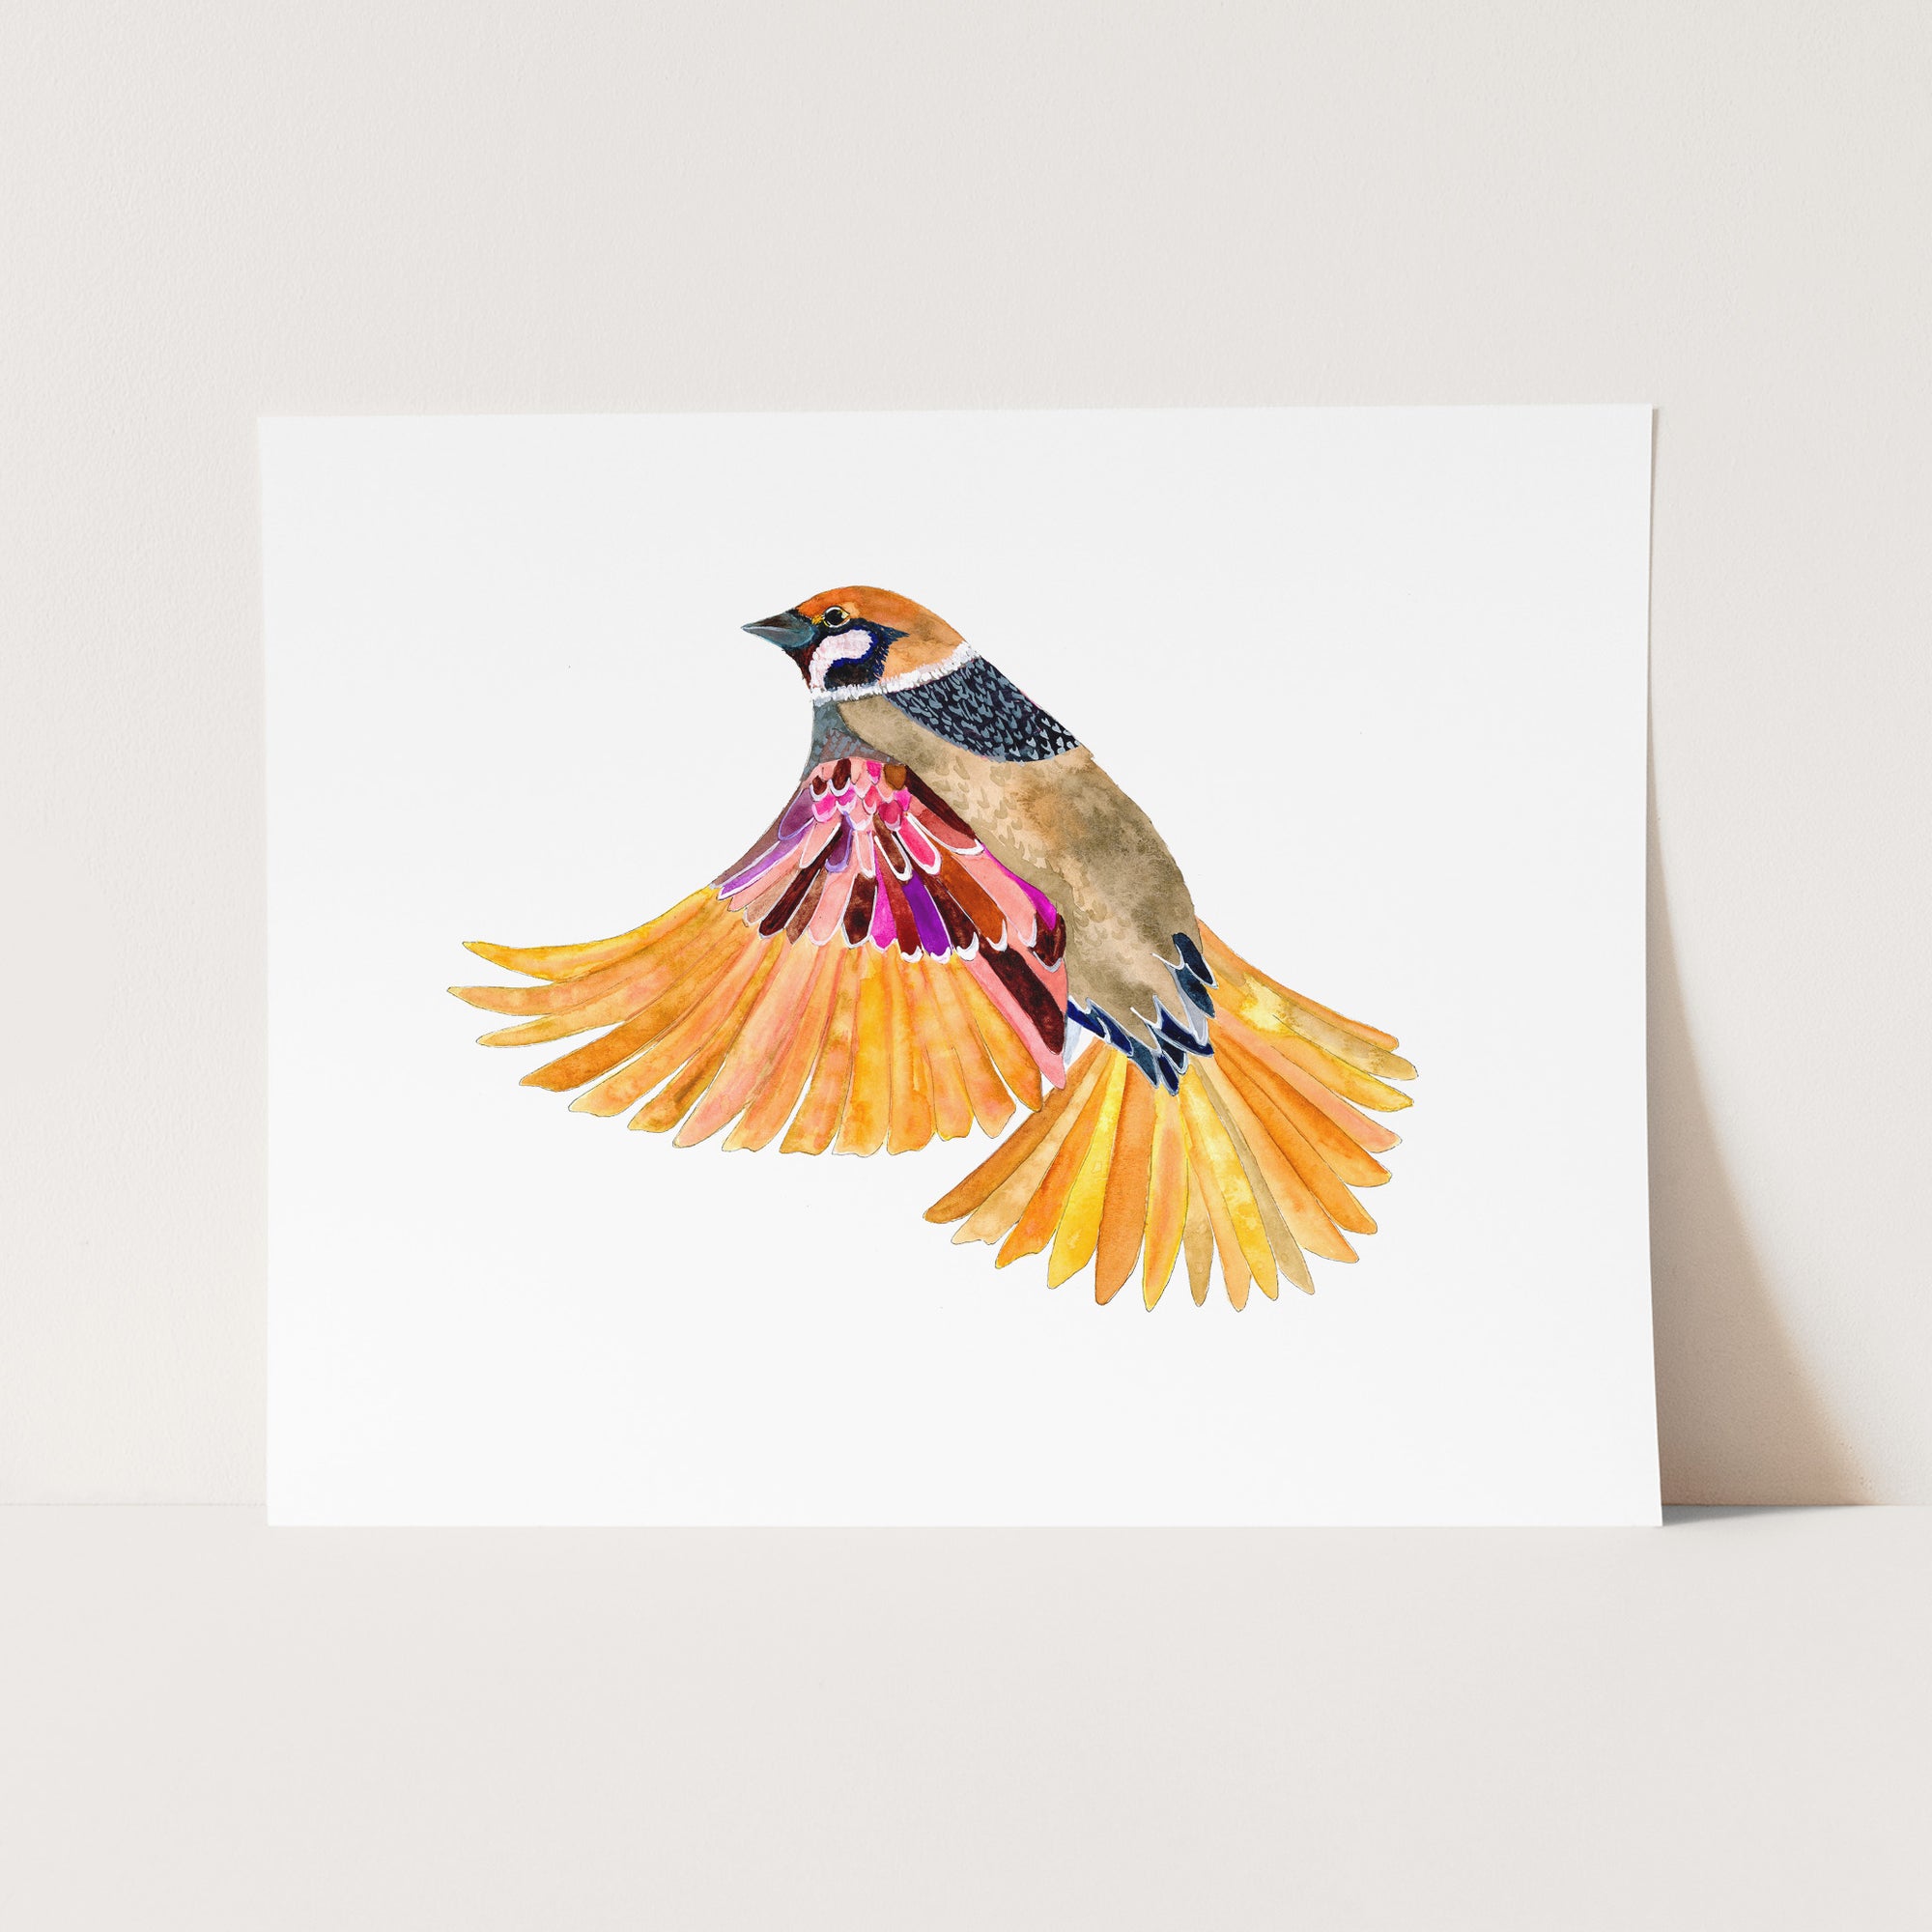 a card with a bird painted on it